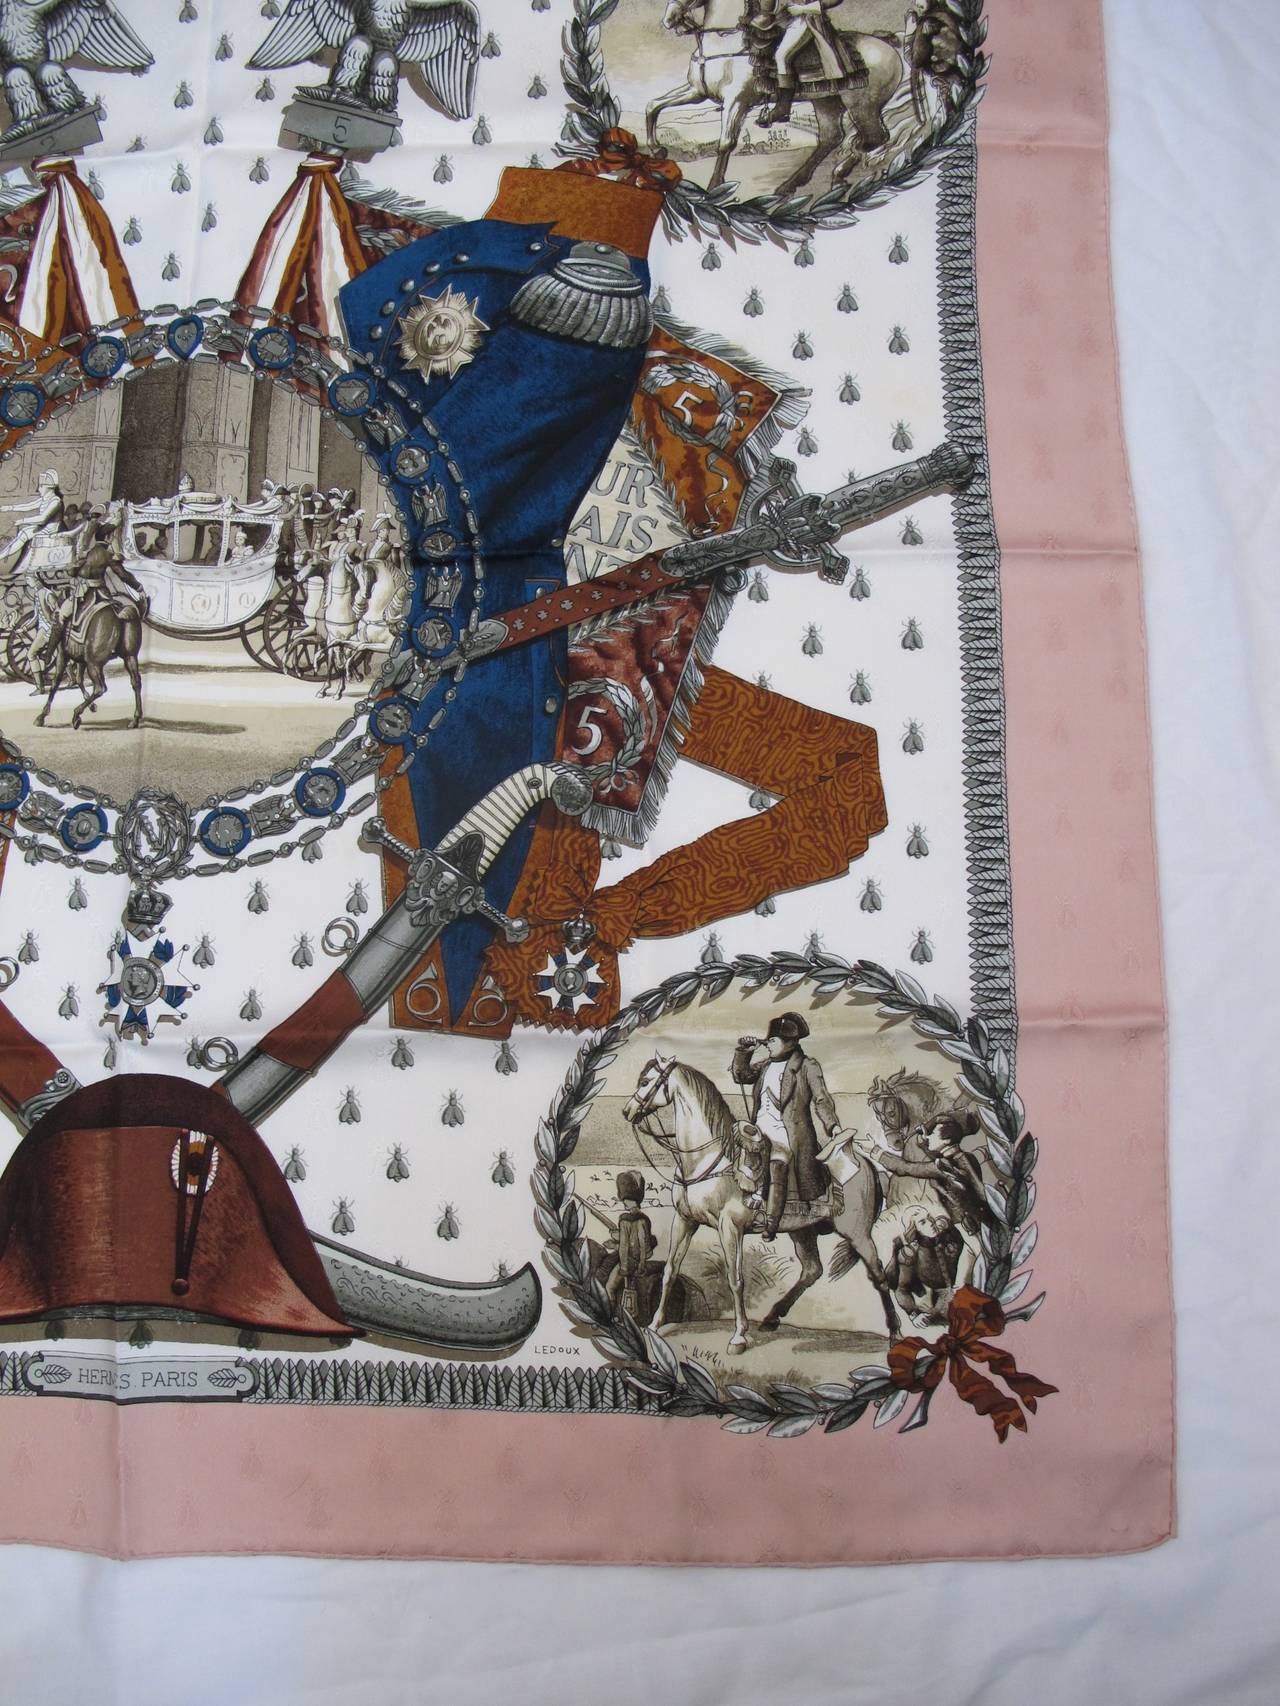 This elegant Napoleon silk scarf has a cream background with dusty pink borders. Images are in different shades of beige, brown, blue and gray. The images featured are: carriage drawn by horses, Napoleon on a horse and other French gentleman with